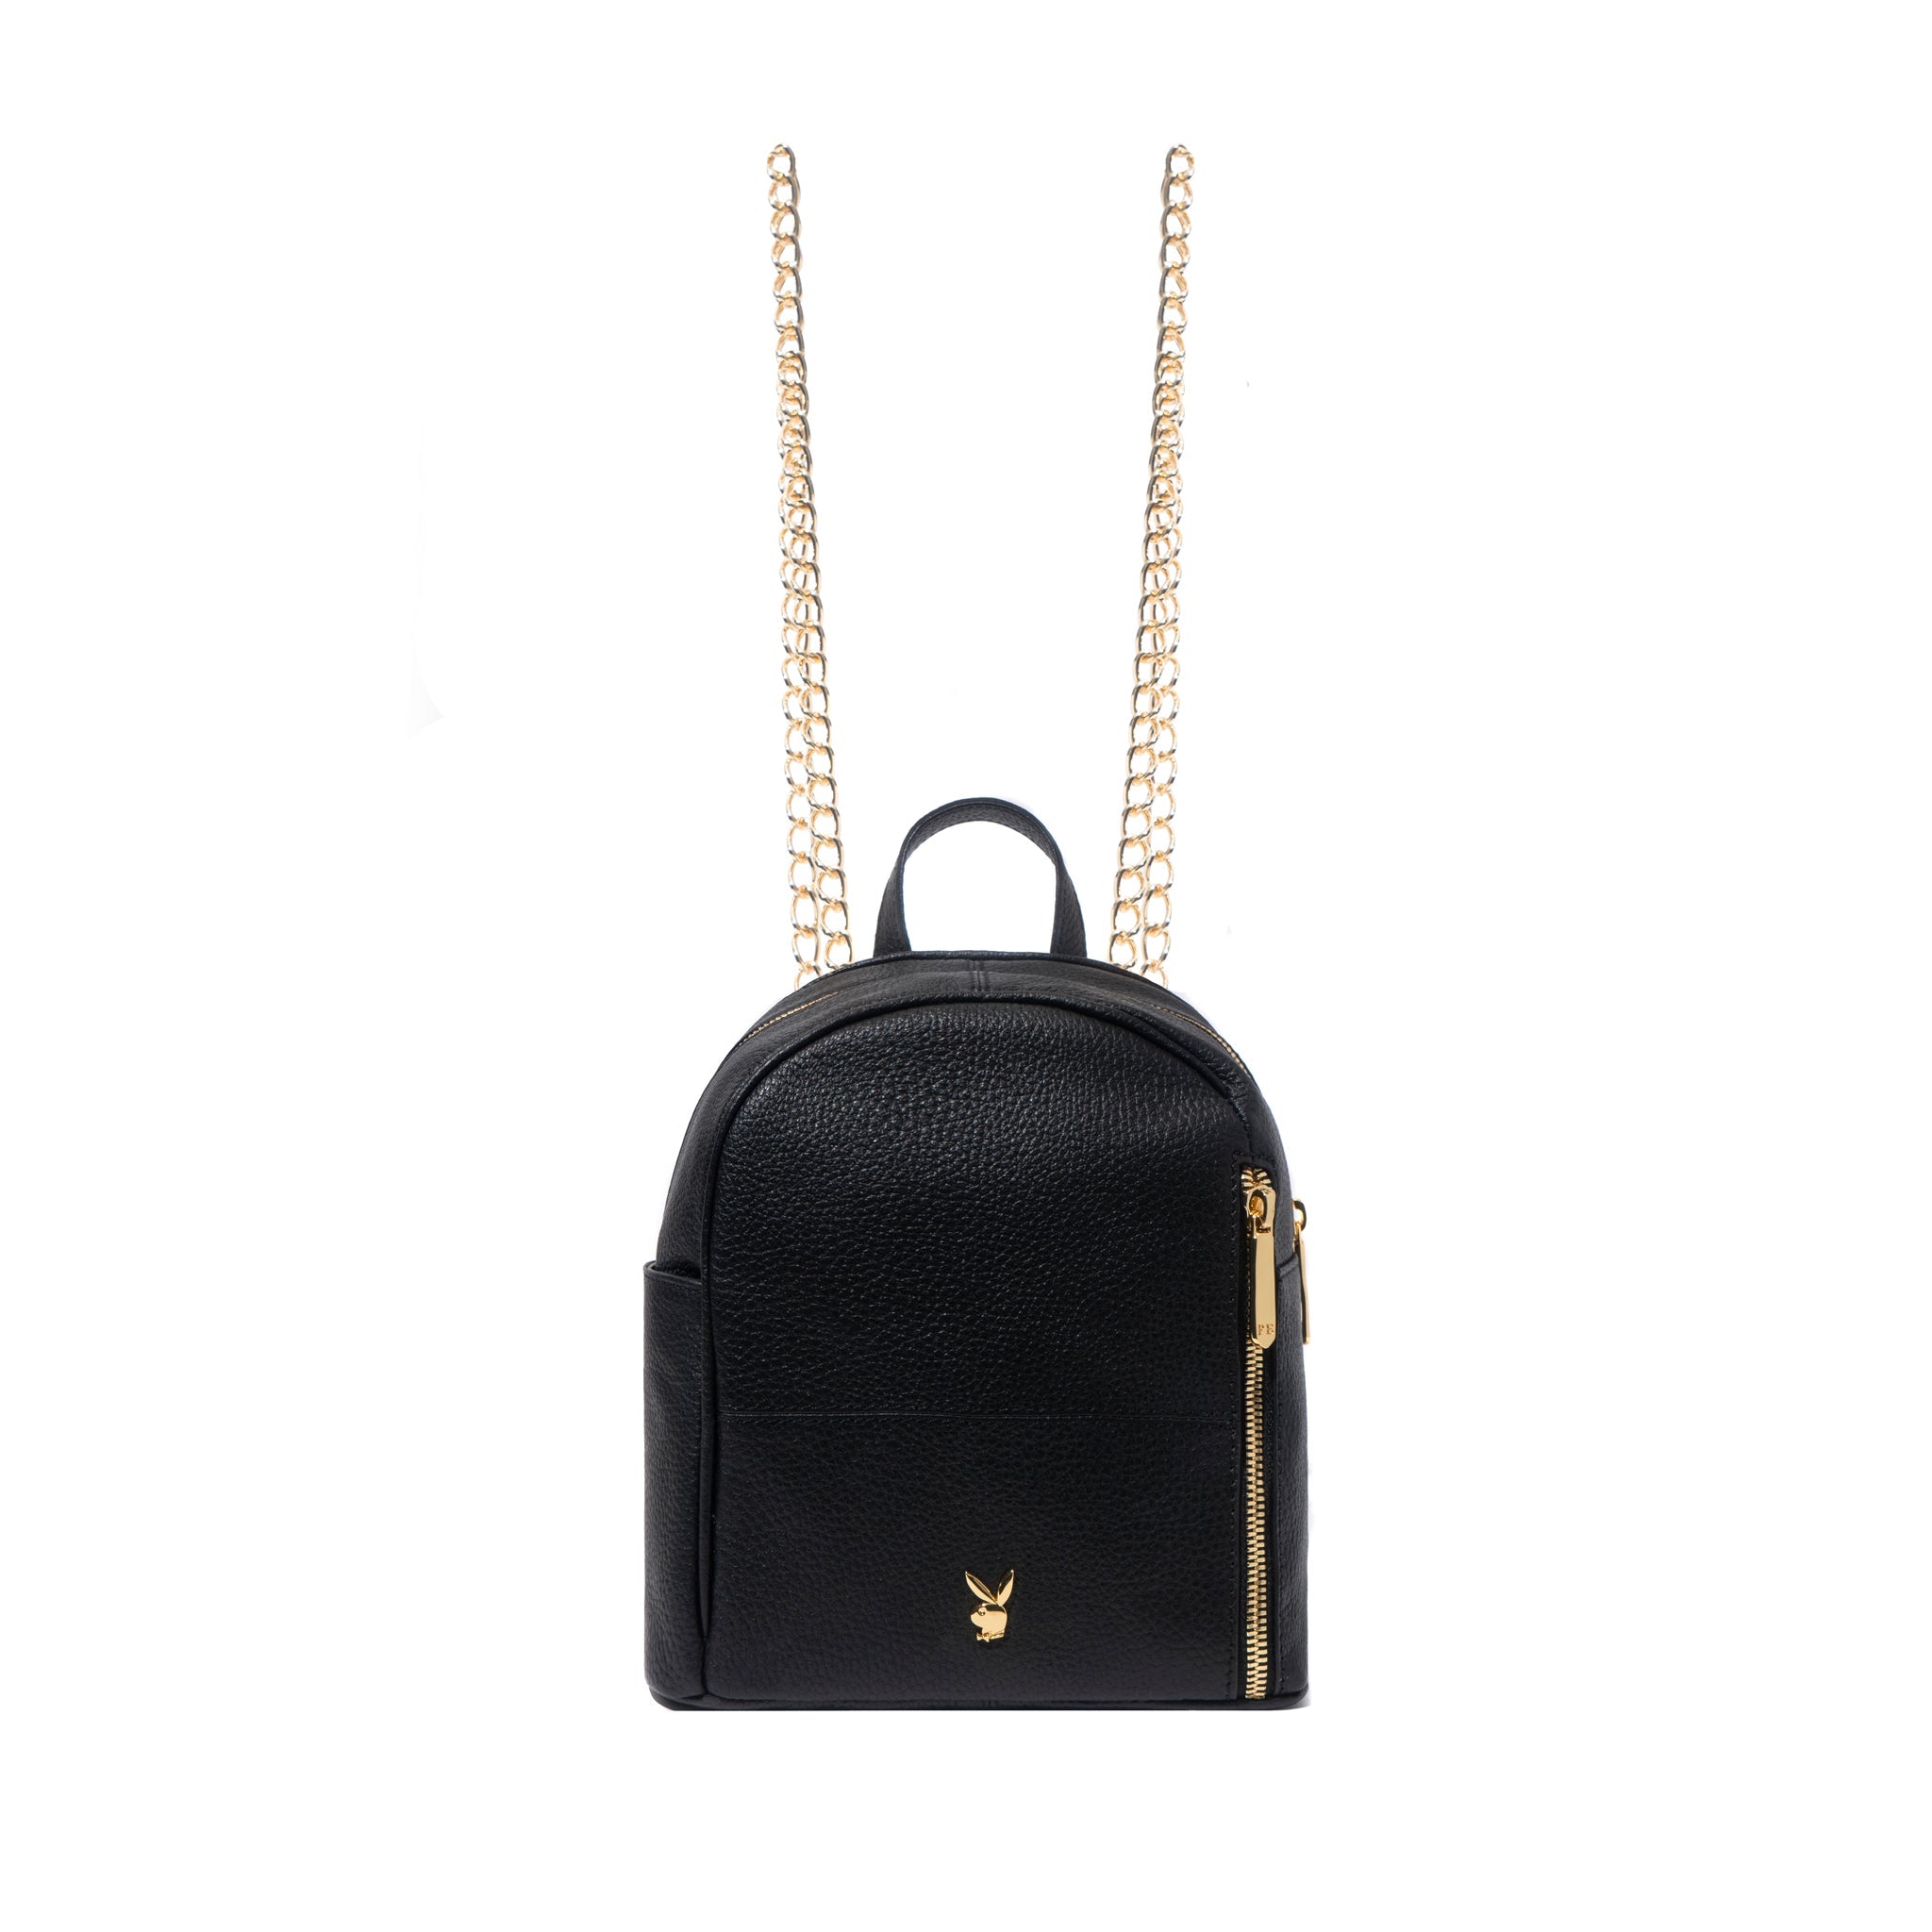 Unisex Bags and Women\'s Clutches | Official Playboy Accessories